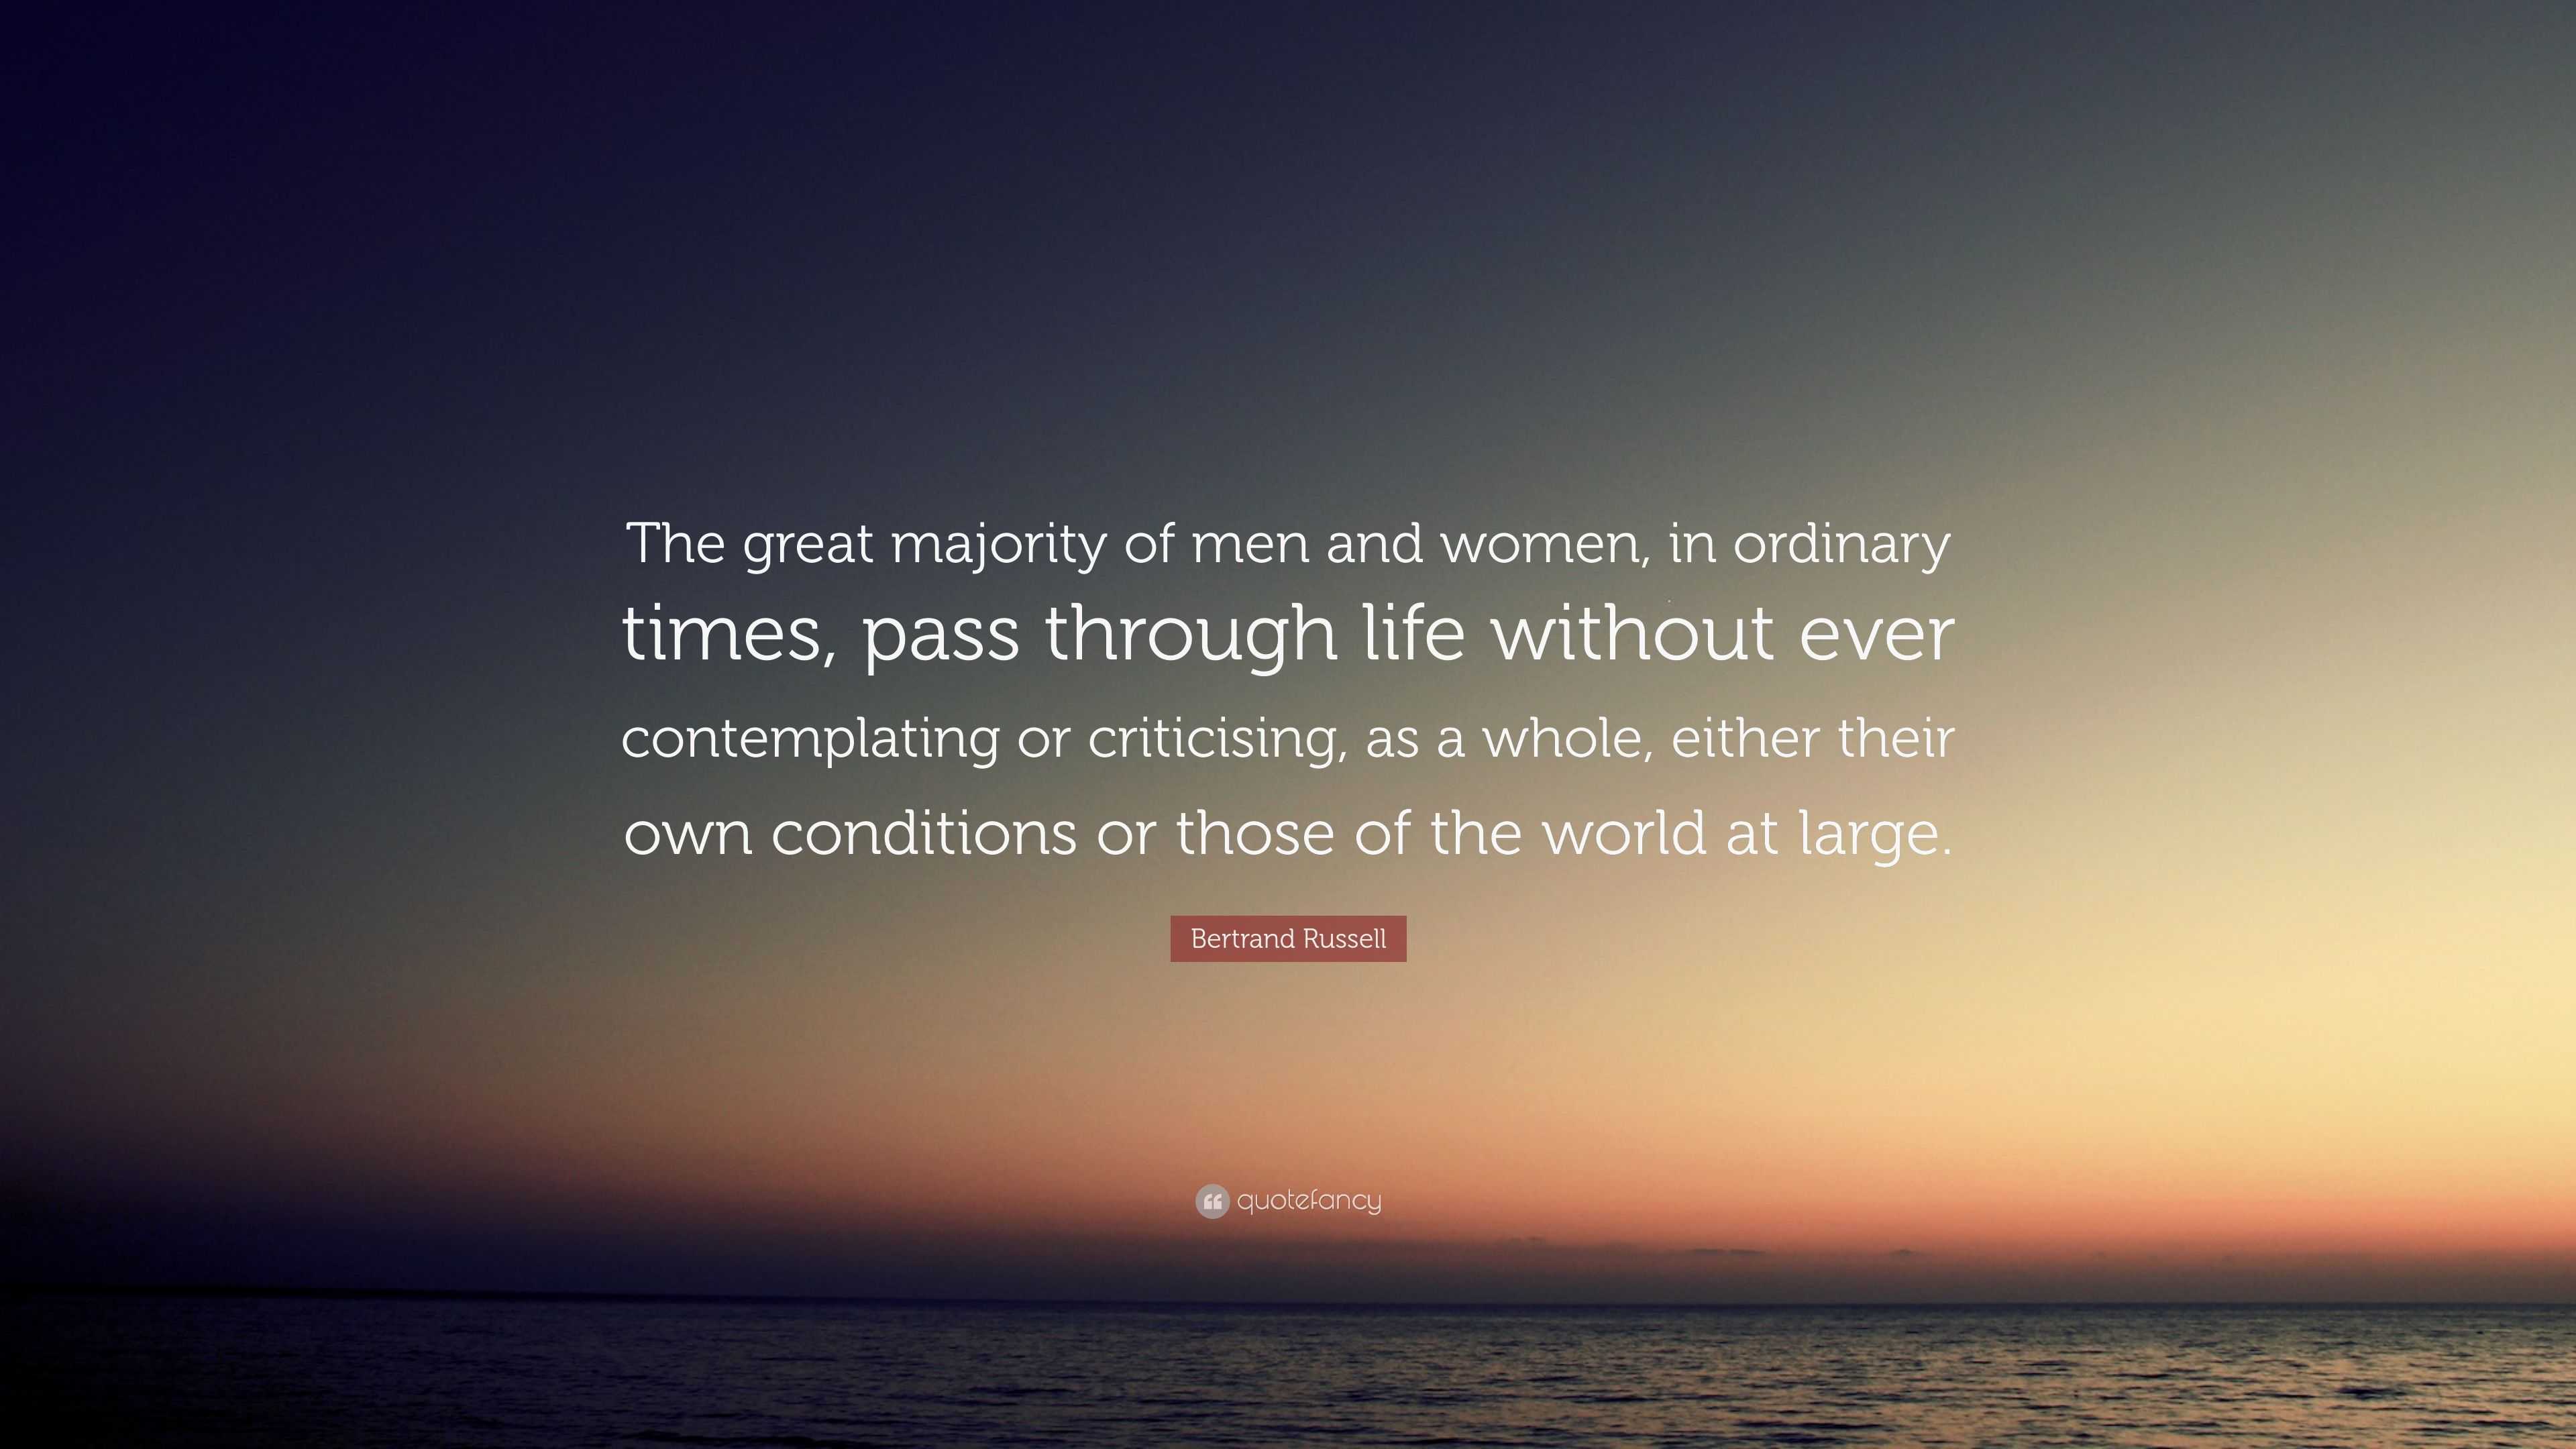 Bertrand Russell Quote: “The great majority of men and women, in ...